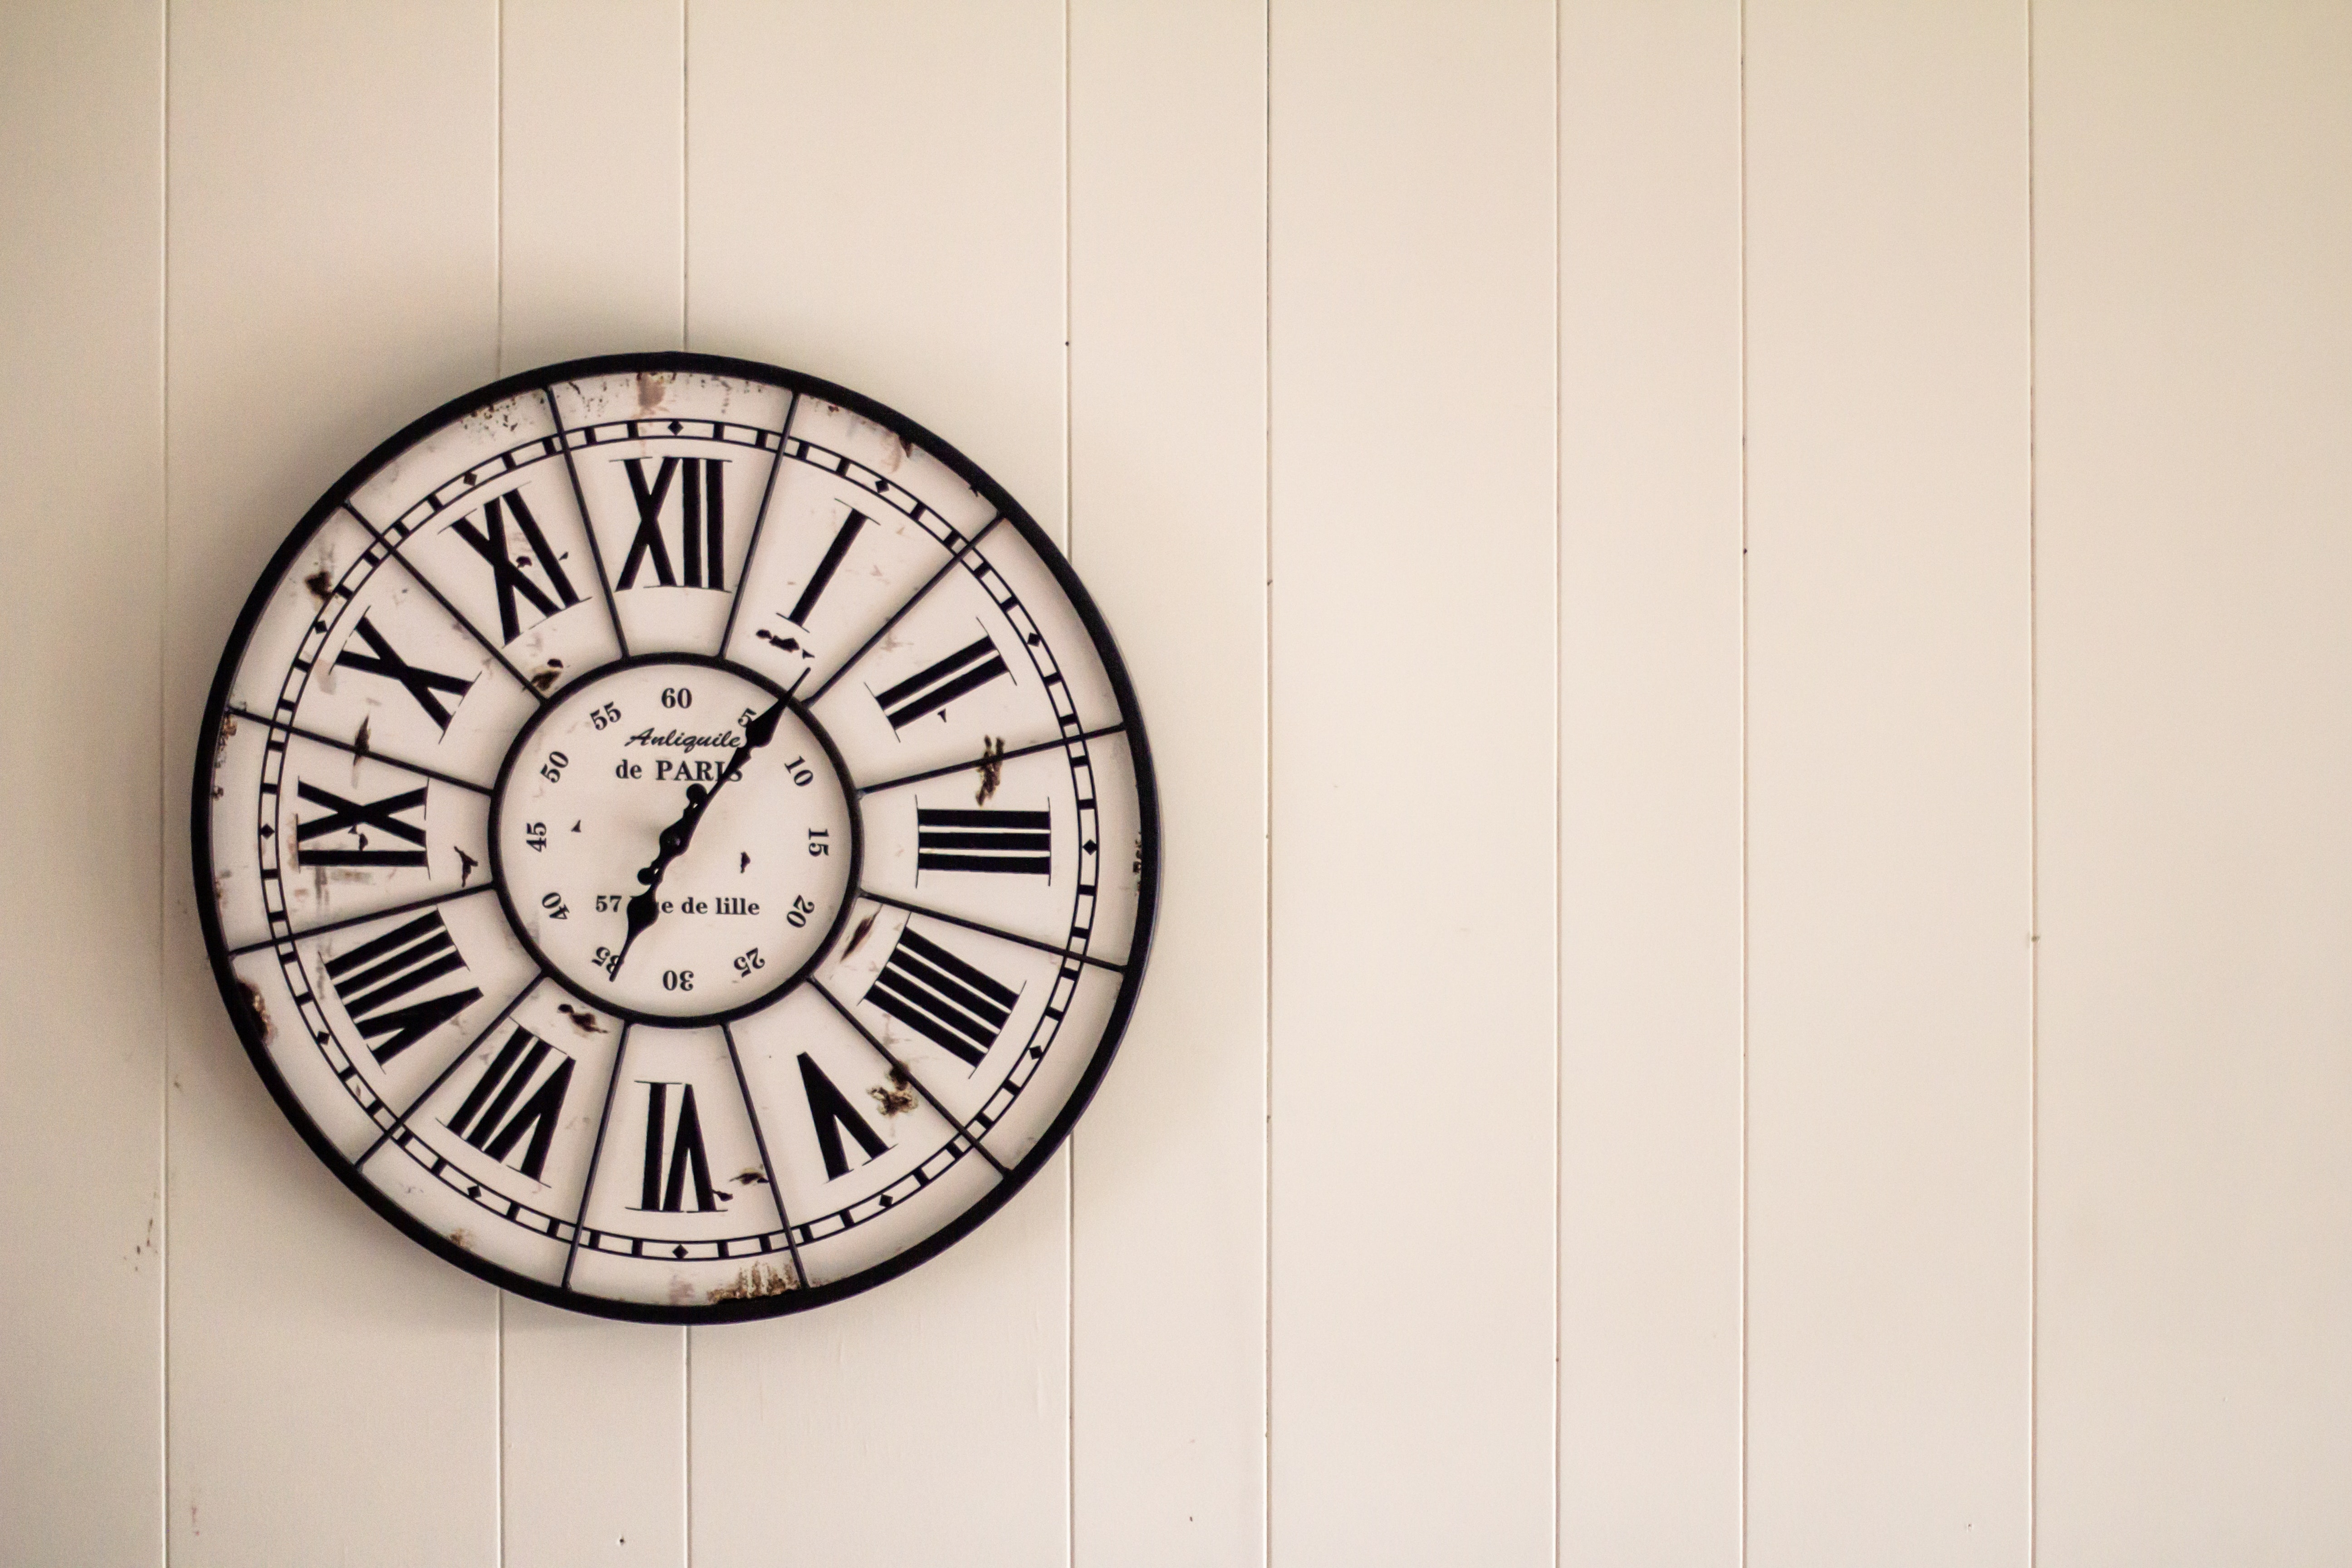 Shop for Statement Clocks at These Stores in Redmond